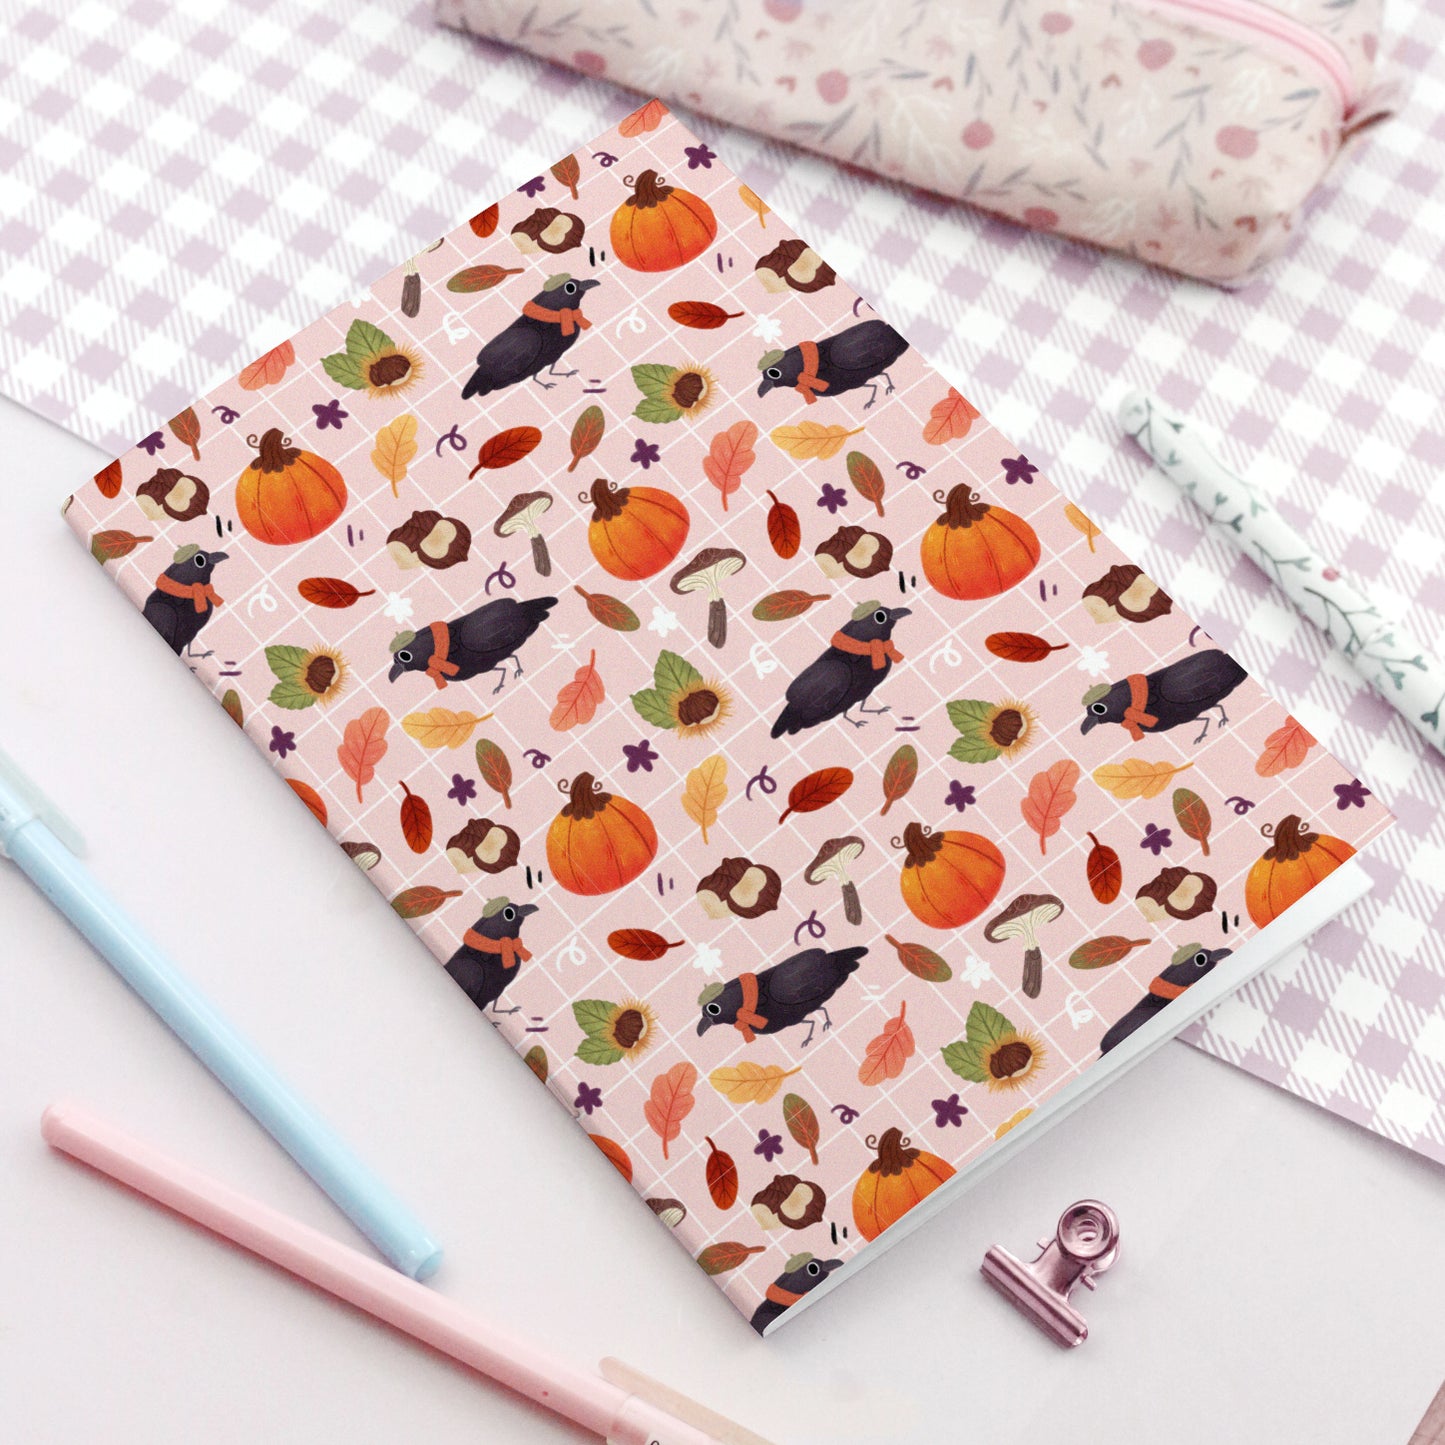 Raven and Pumpkins Notebook - Soft cover notebook